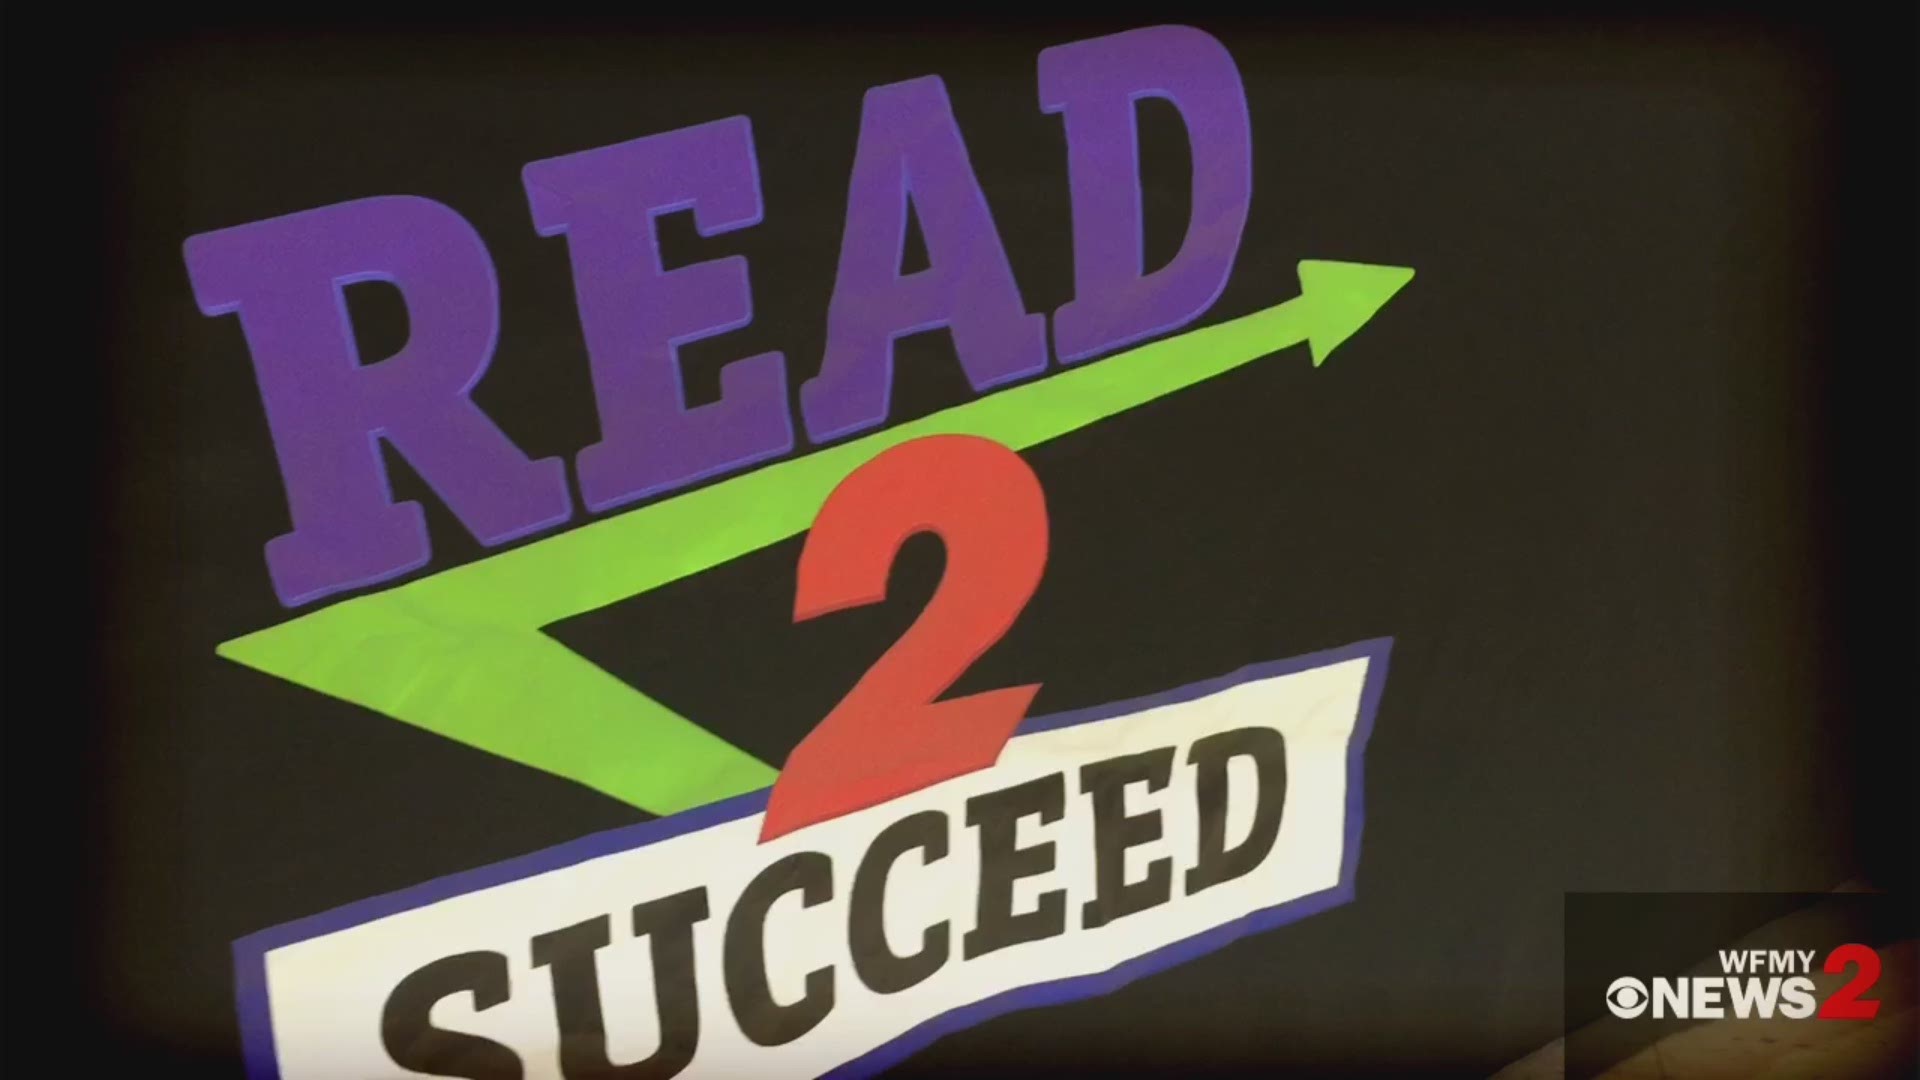 WFMY News 2's Good Morning Show crew brings the Read 2 Succeed tour to McLeansville Elementary School